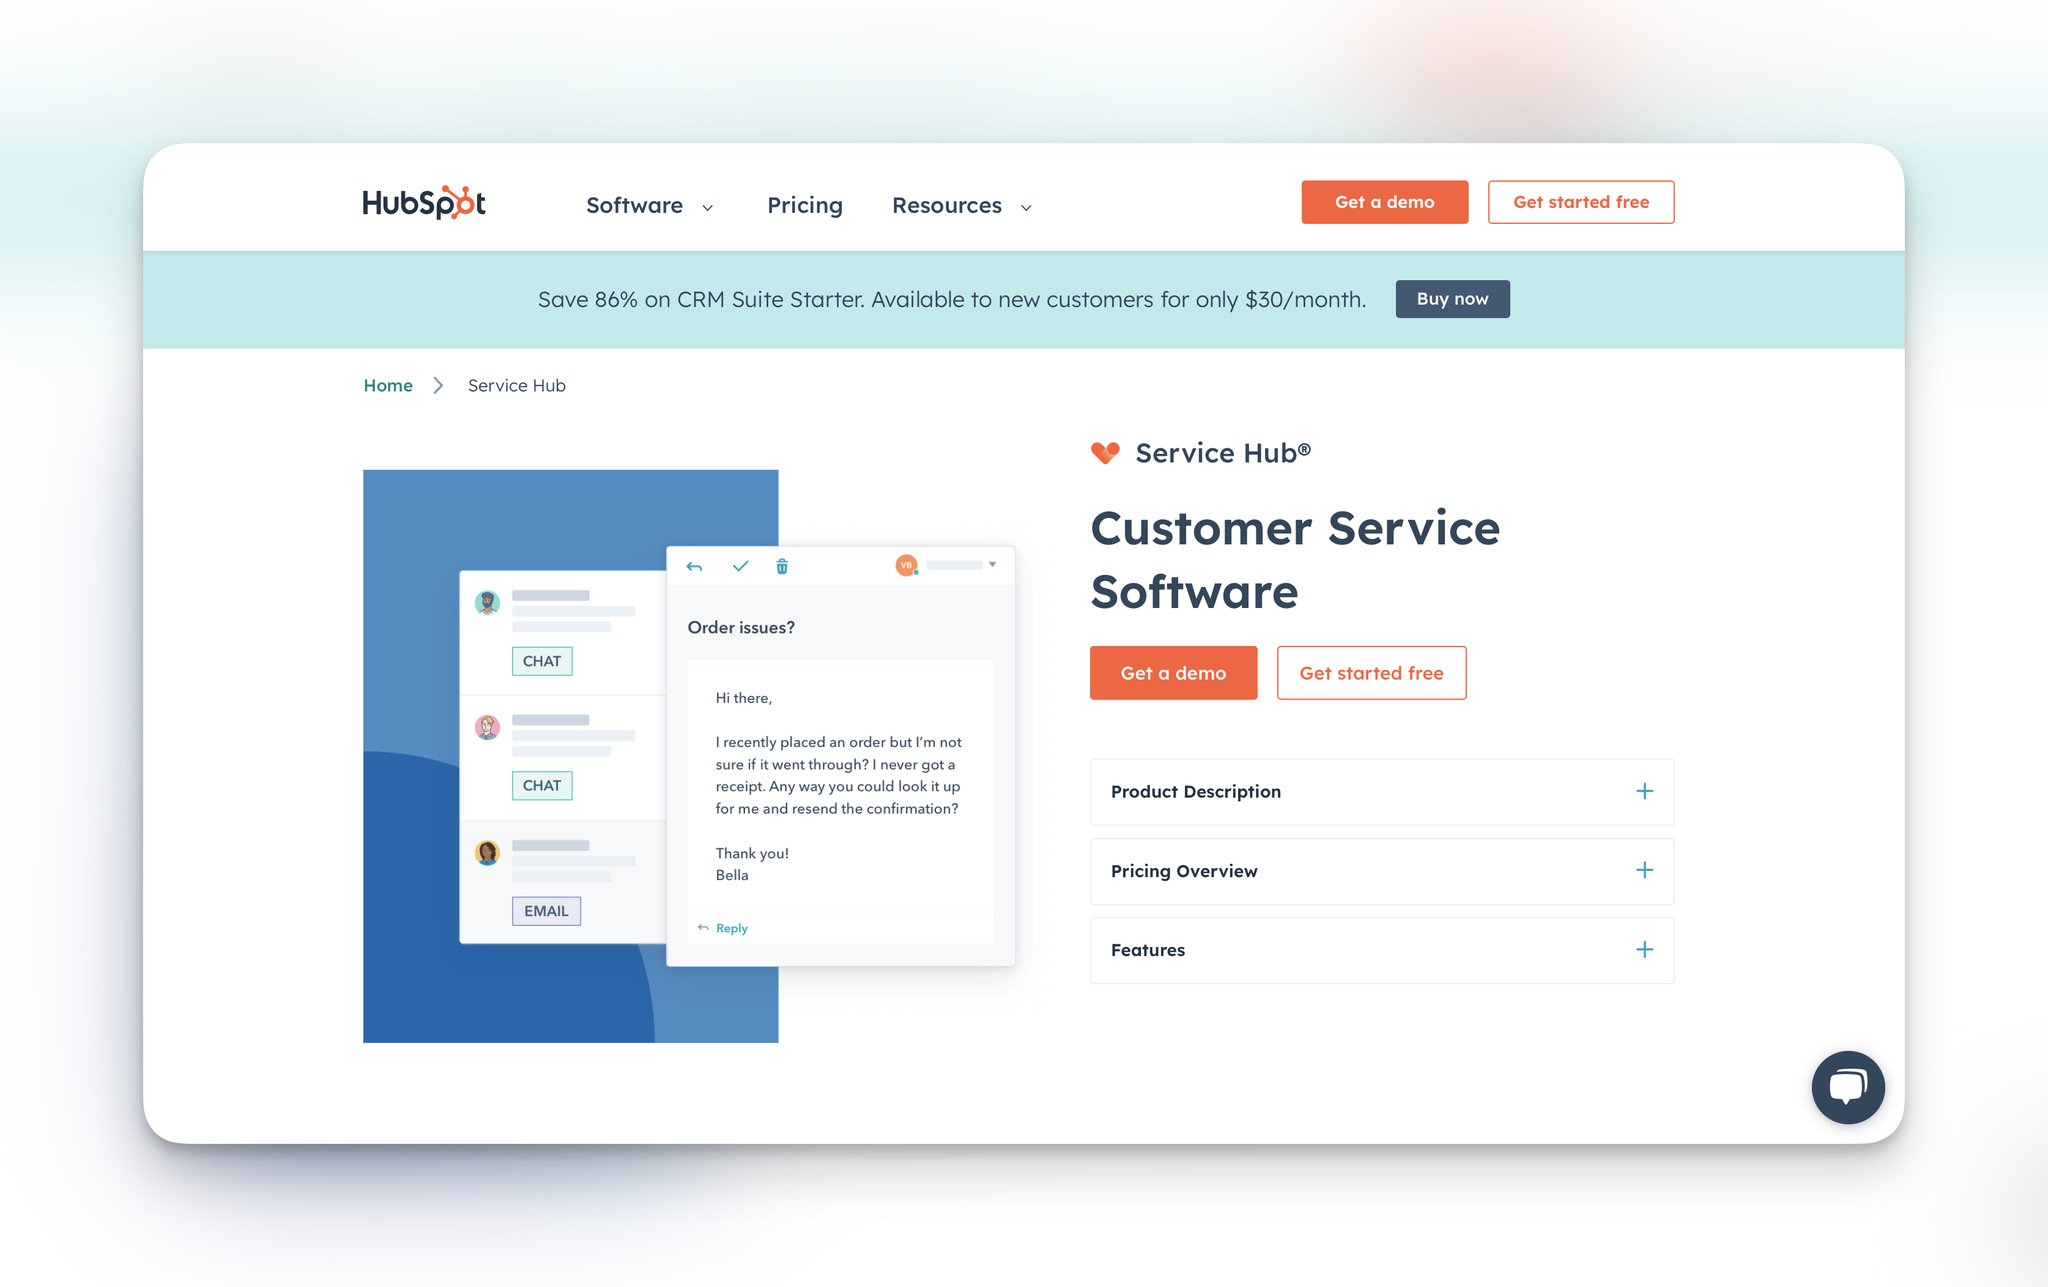 Hubspot Service Hub website with the chat windows on the left and on the right, there is a "Customer Service Software" headline followed by "Get a demo" and "Get started free" buttons